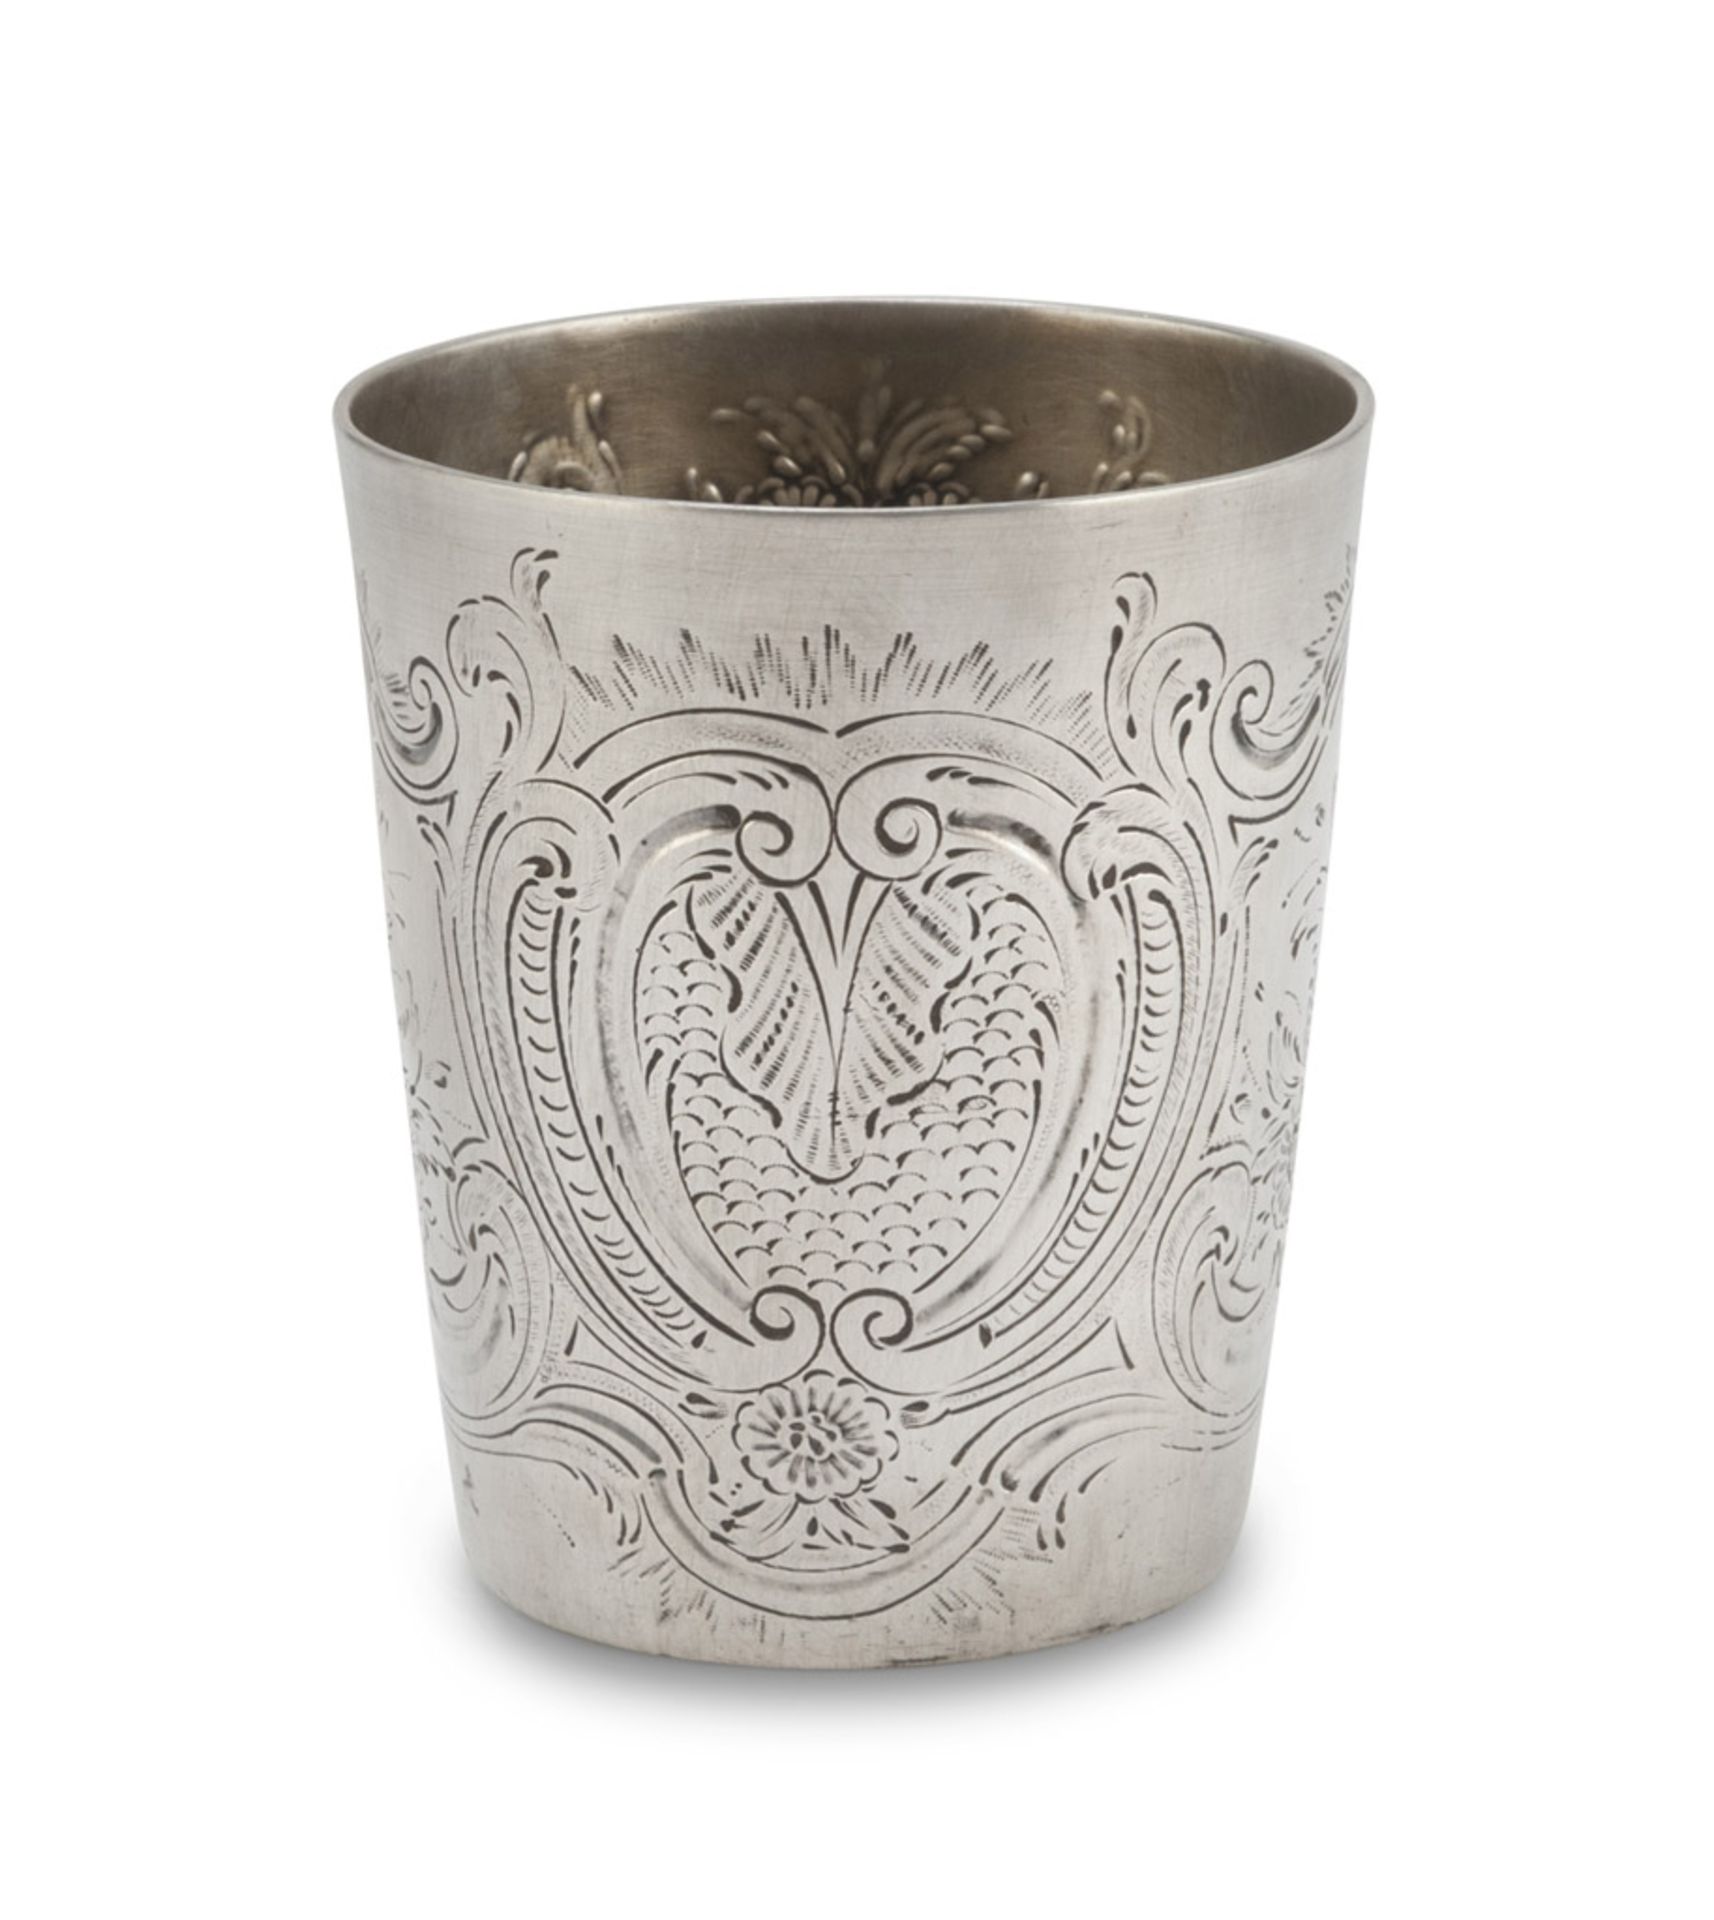 SILVER BEAKER, 19TH CENTURY engraved with floral motifs, coat of arms and initials. Measures cm.